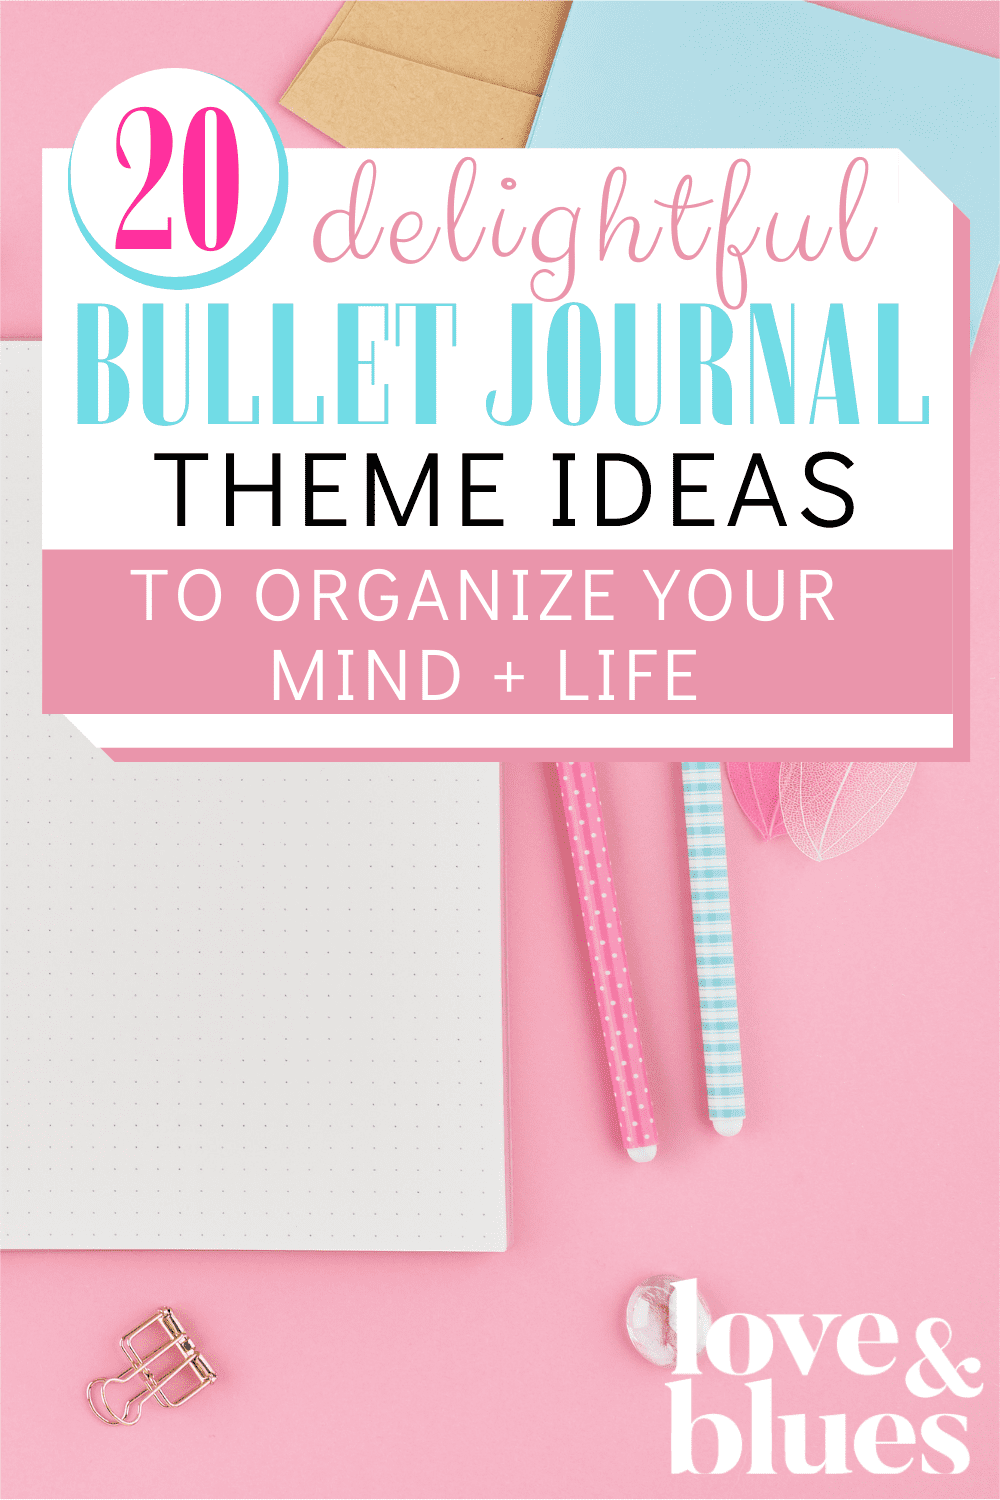 These are super fun bullet journal theme ideas! Must try some of them.